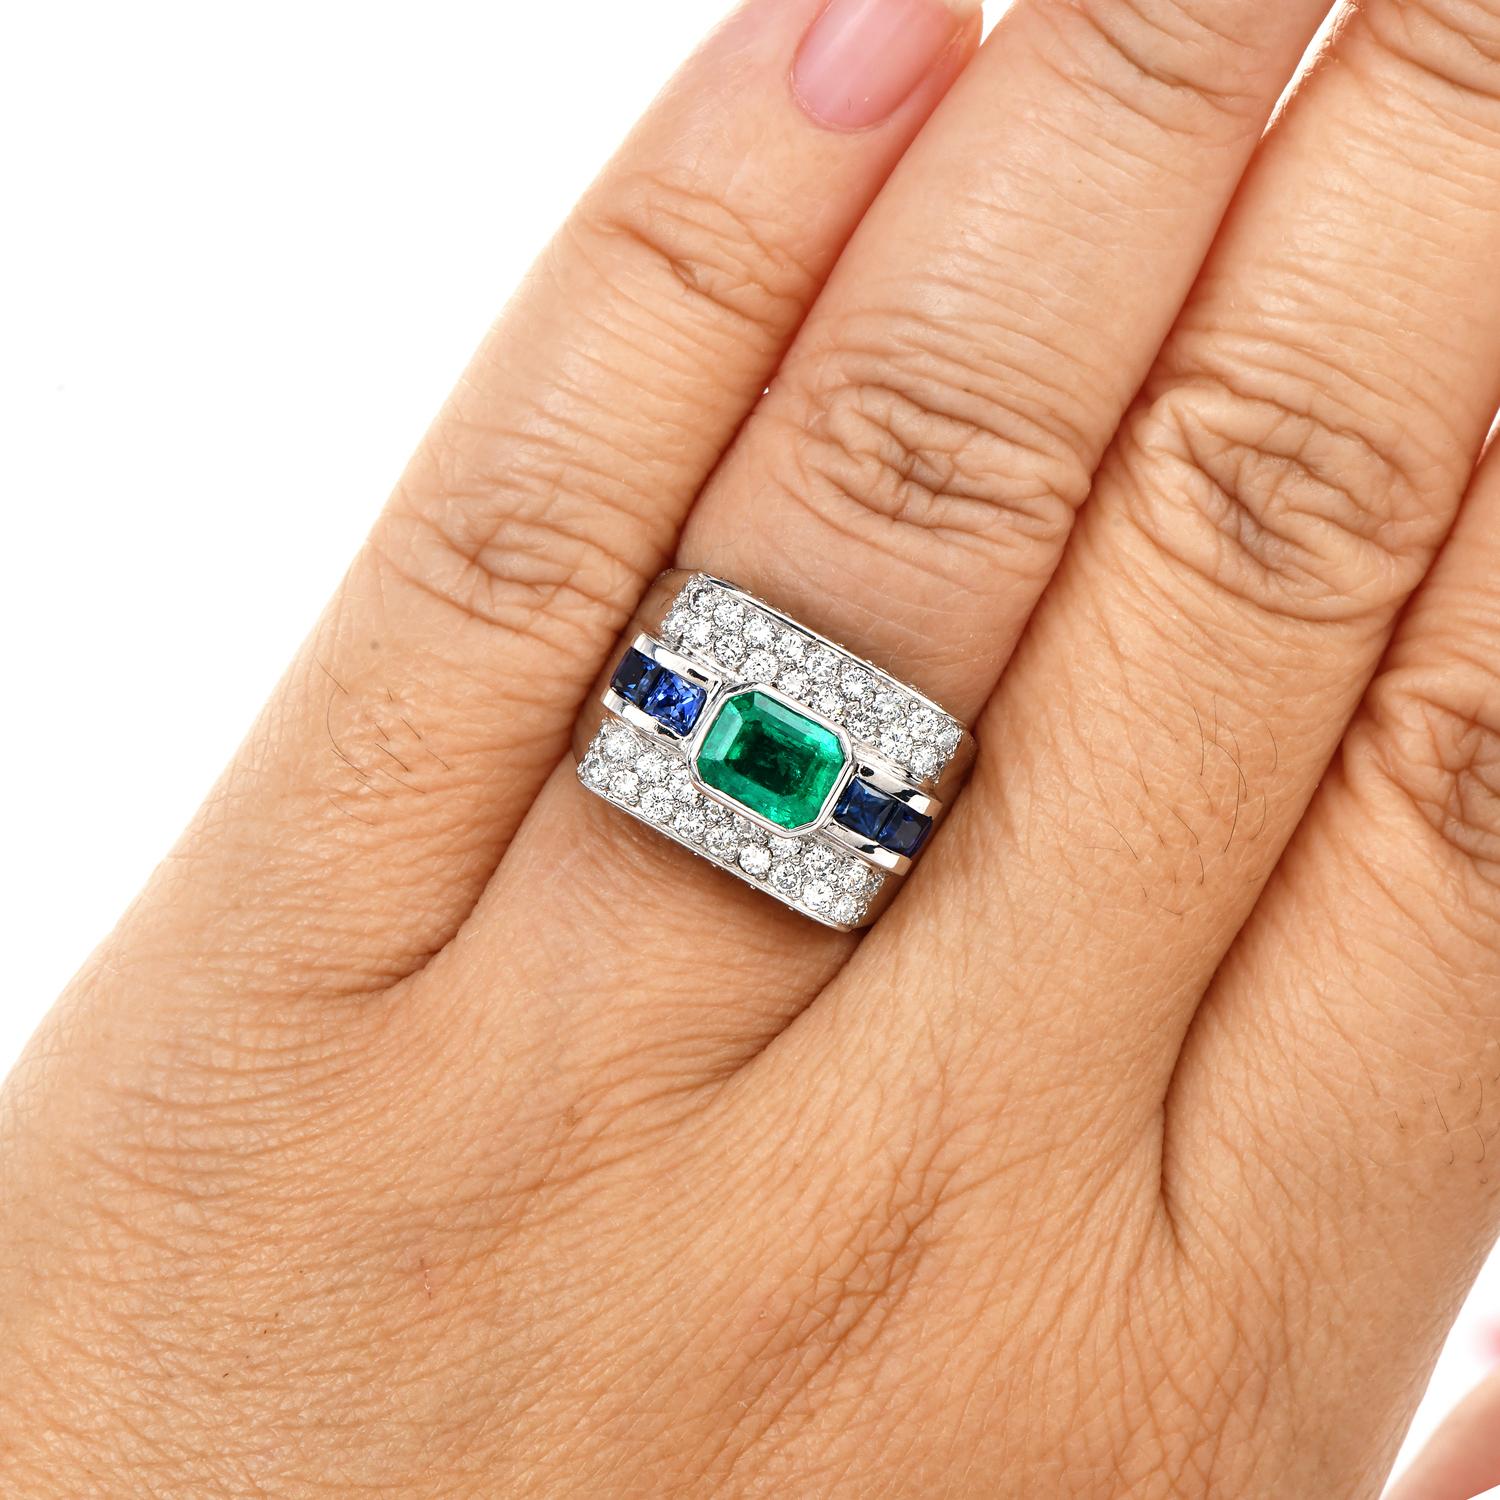 This exquisite  rectangular-shaped cocktail ring with a pave set design ring

Is crafted in solid 18k white gold.

The center exposes one exquisite Green Emerald, Emerald Cut, Bezel Set, weighing approx: 1.01 carats.

sided by (6) Blue Sapphire